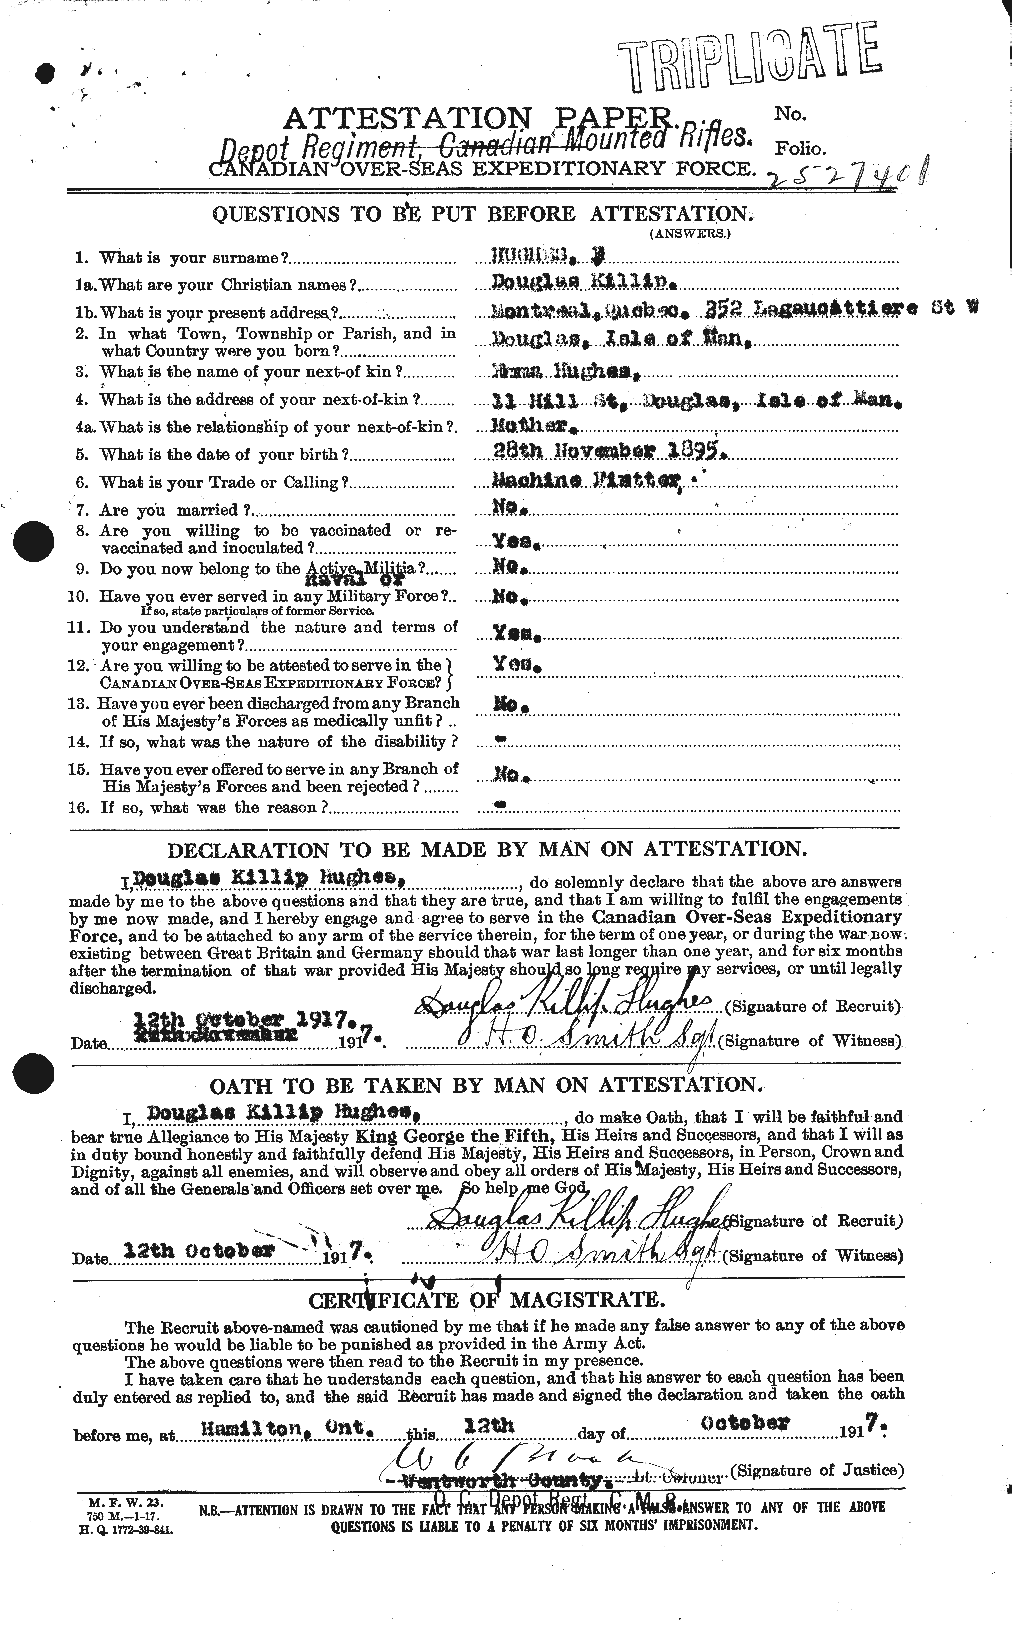 Personnel Records of the First World War - CEF 402650a